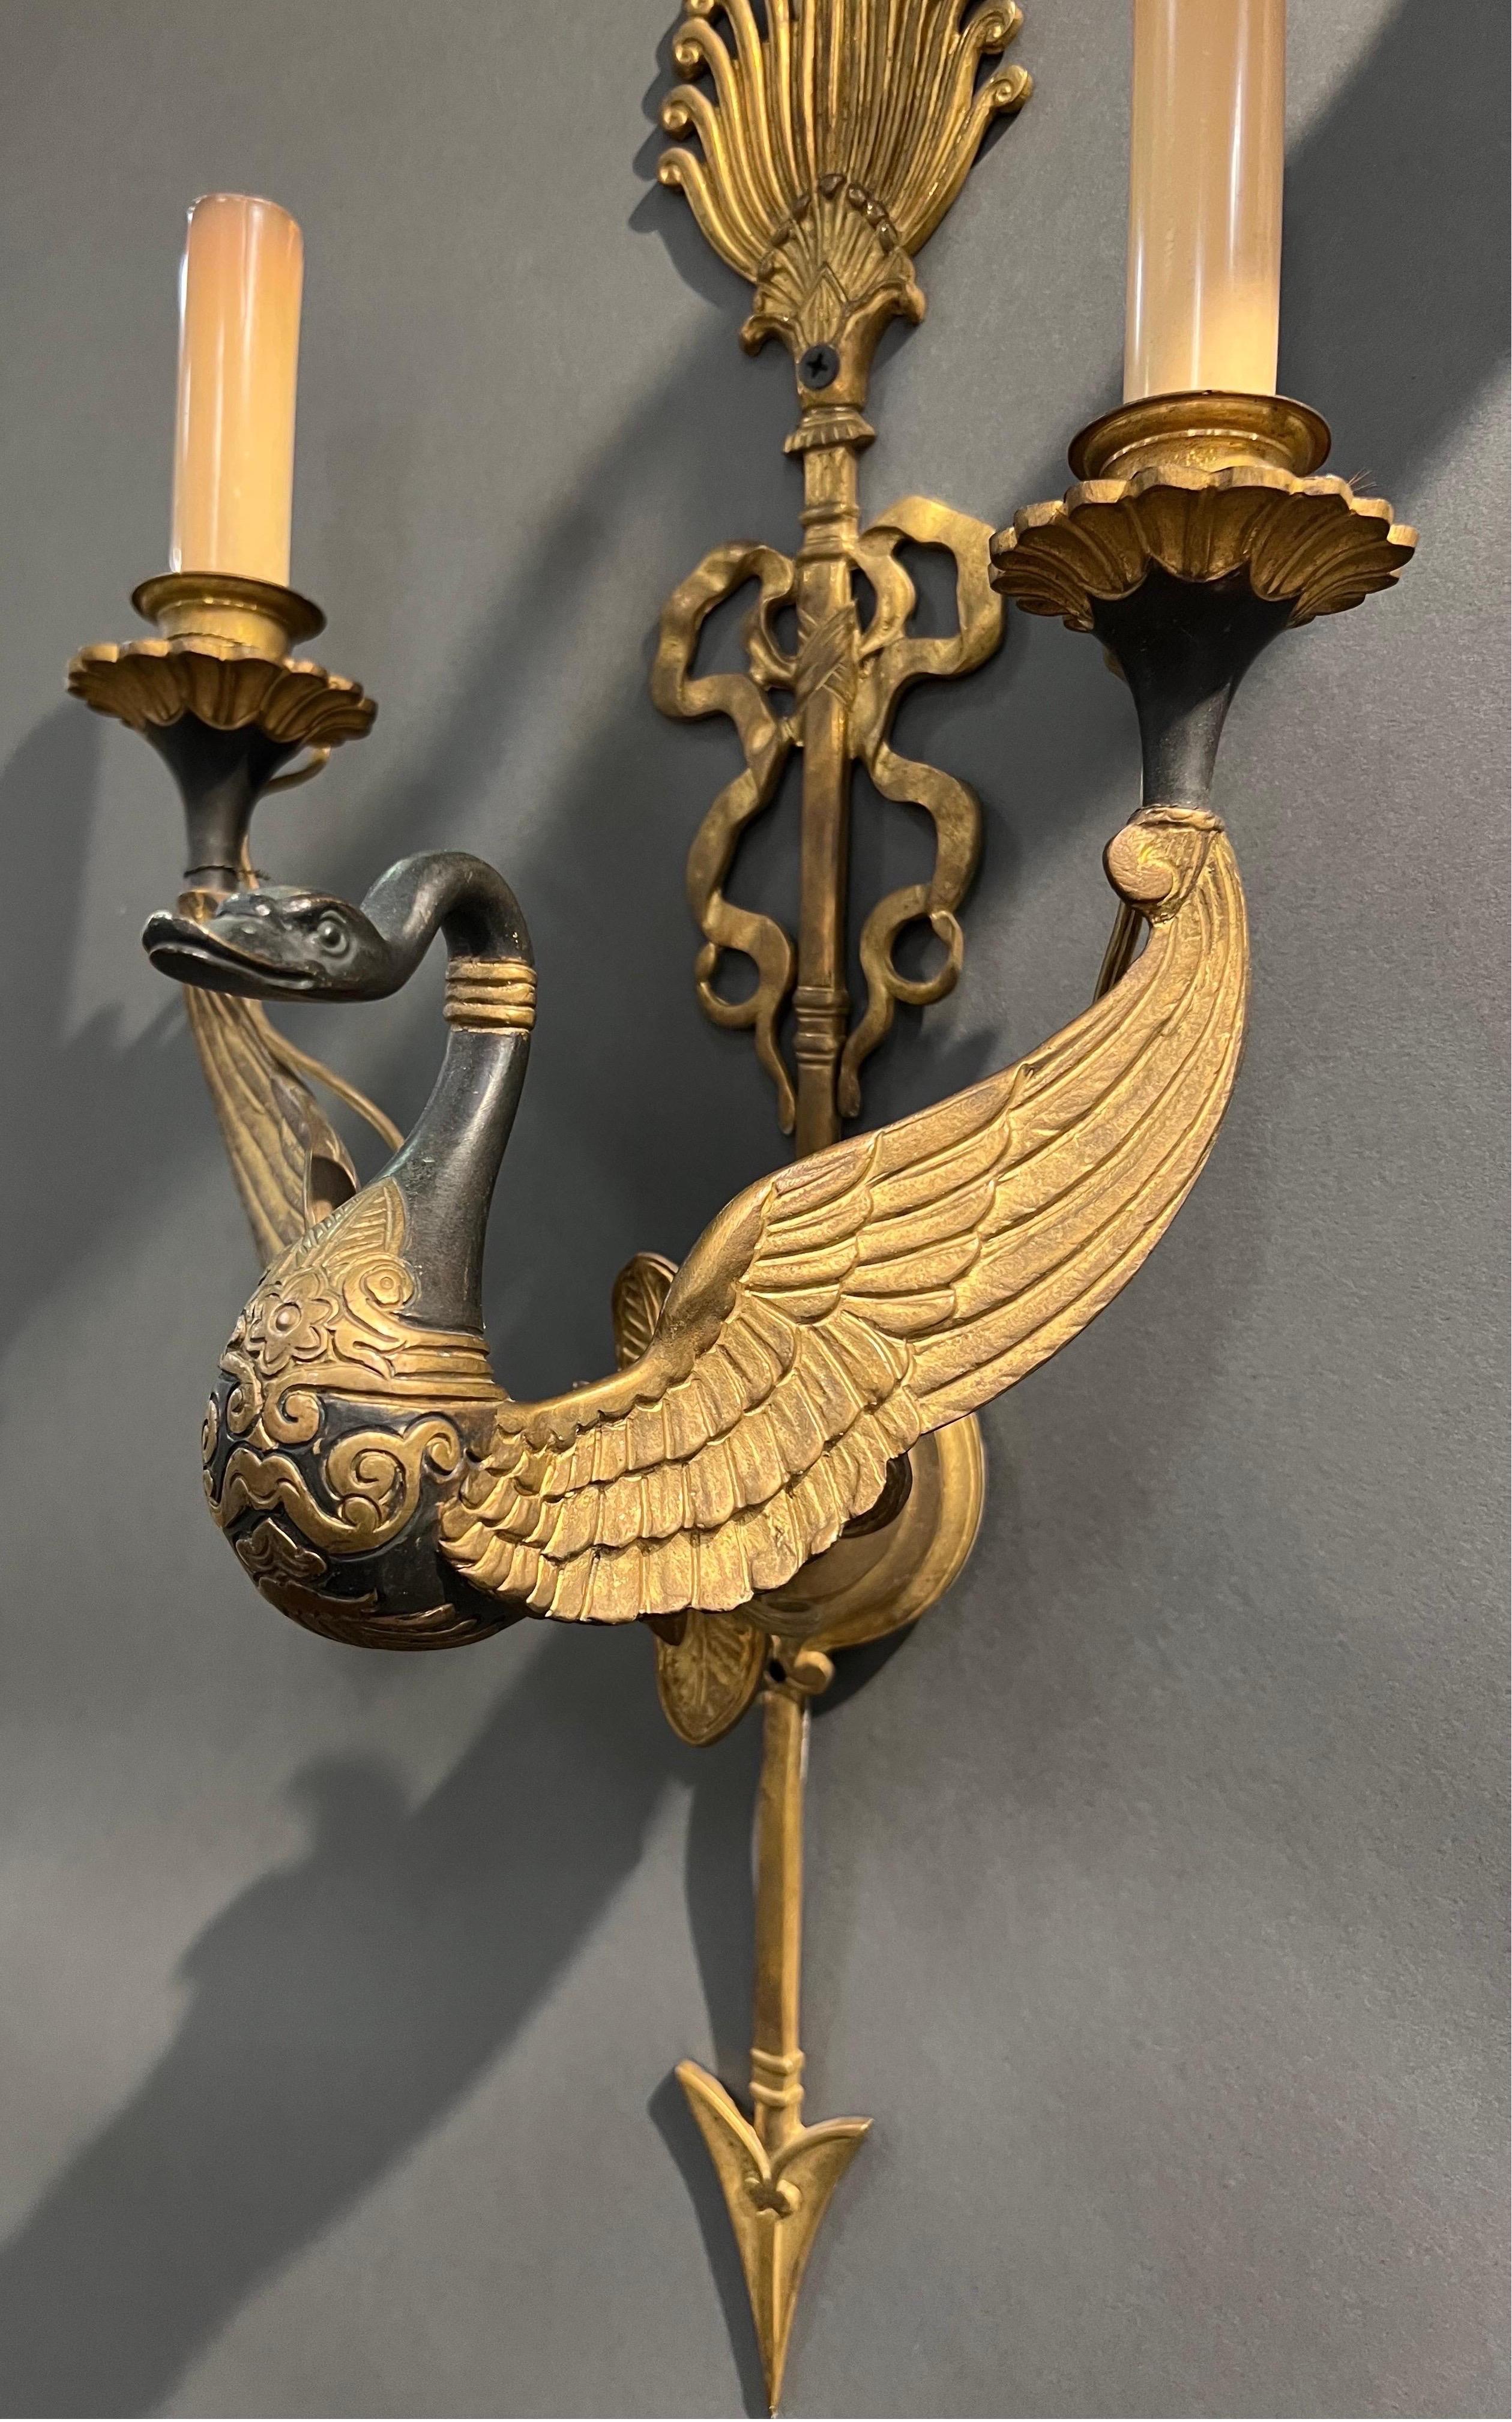 Empire Fine 19th Century French Neoclassical Swan Form Sconces 2 Pair Available  For Sale